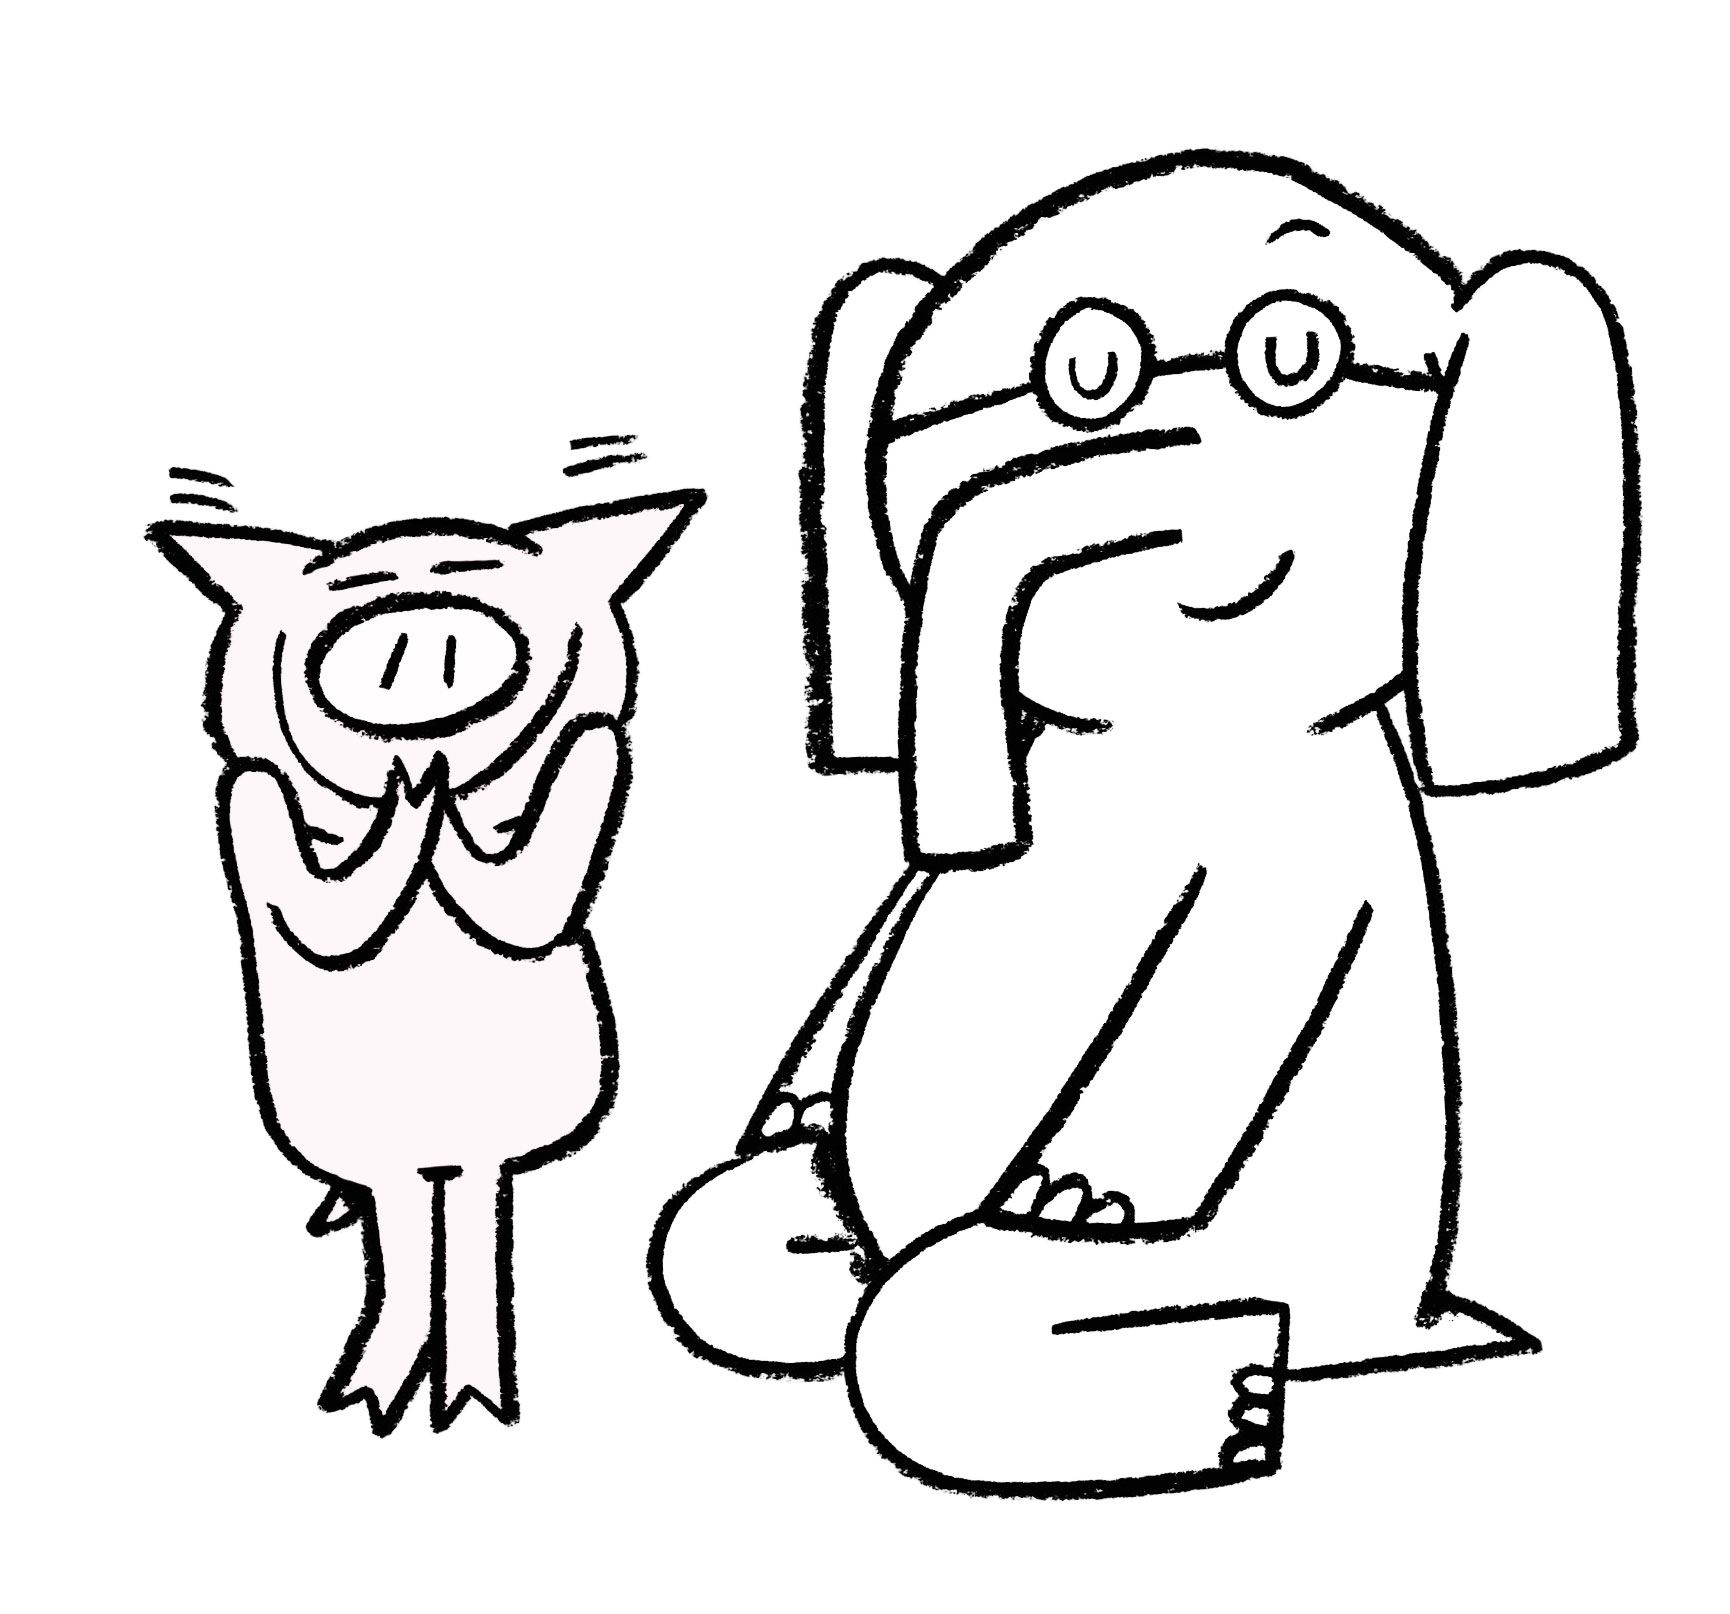 Elephant And Piggie Coloring Page | Mo willems, Piggie and elephant,  Kindergarten coloring pages